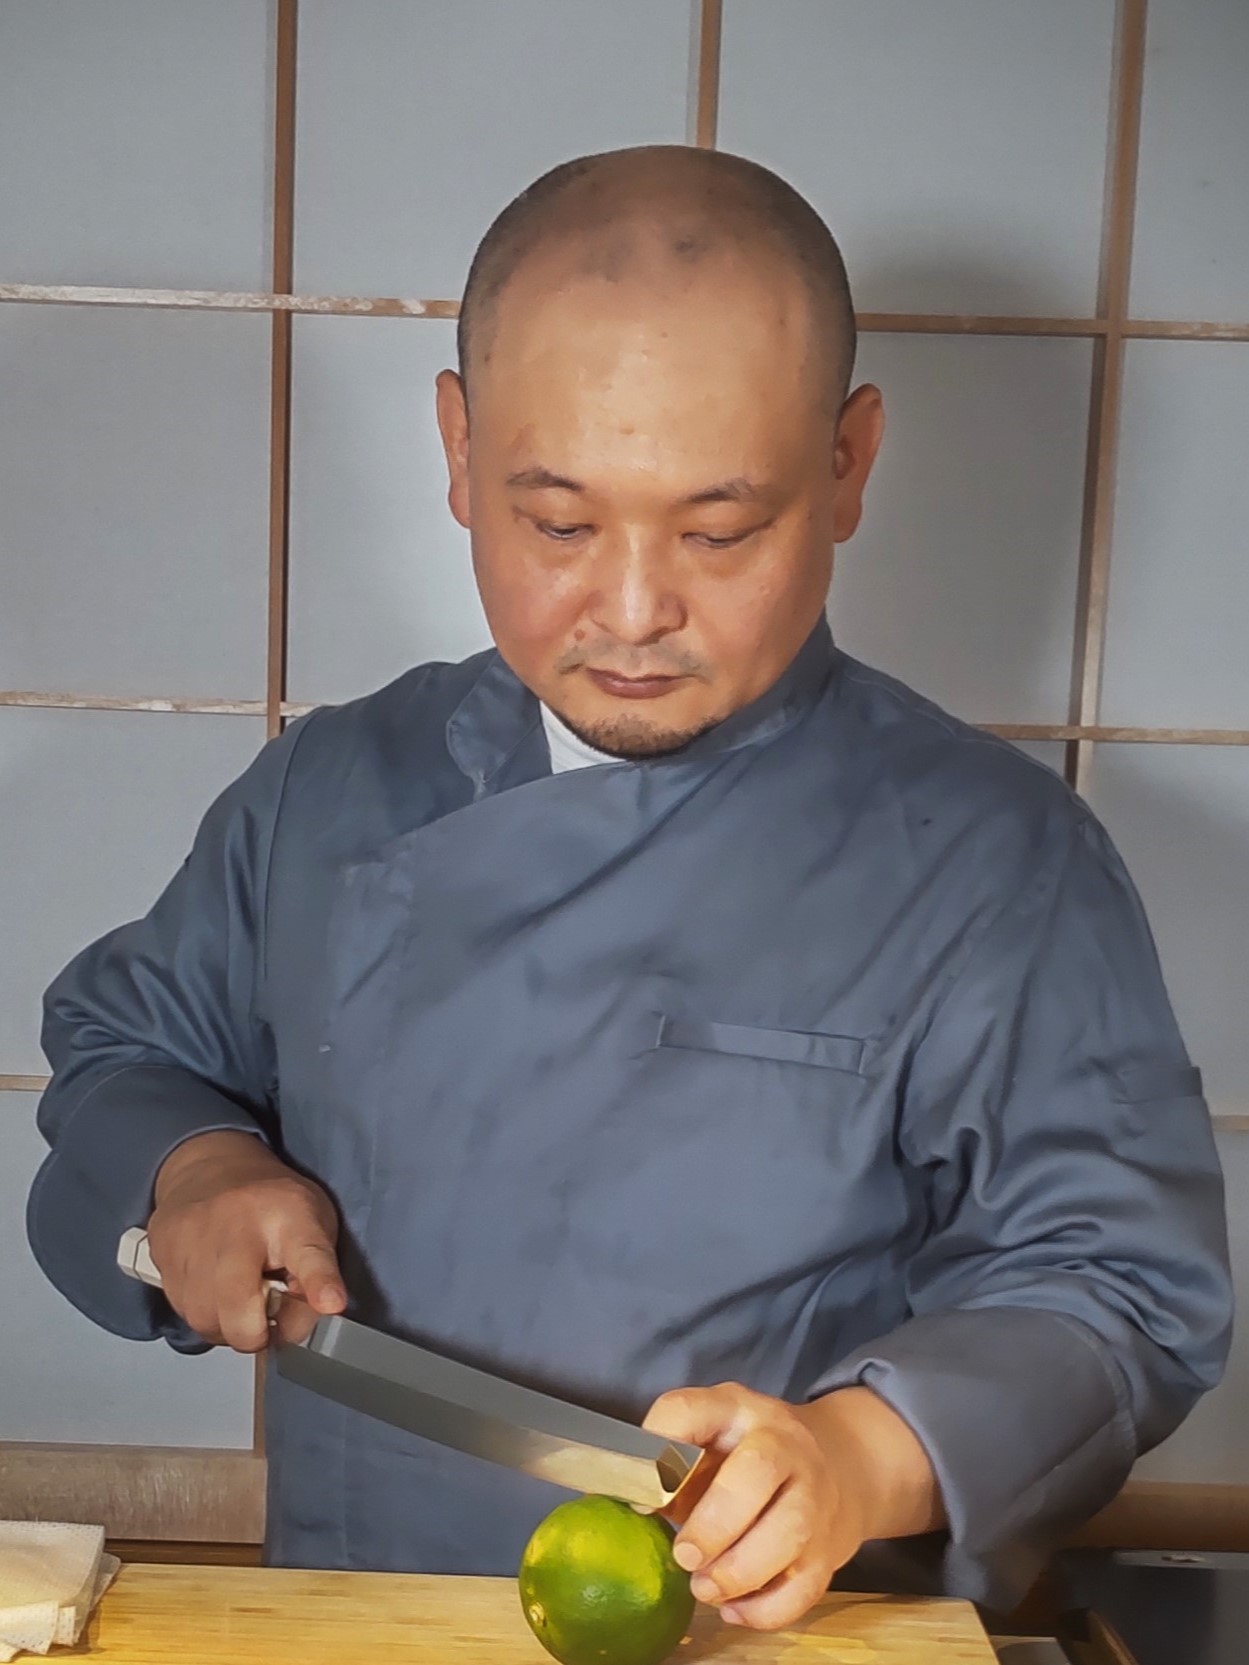 Takeshi Moriyama is a chef of traditional Japanese cuisine. He is a man of gentle speech like a clergyman, and an athlete with an inner passion.